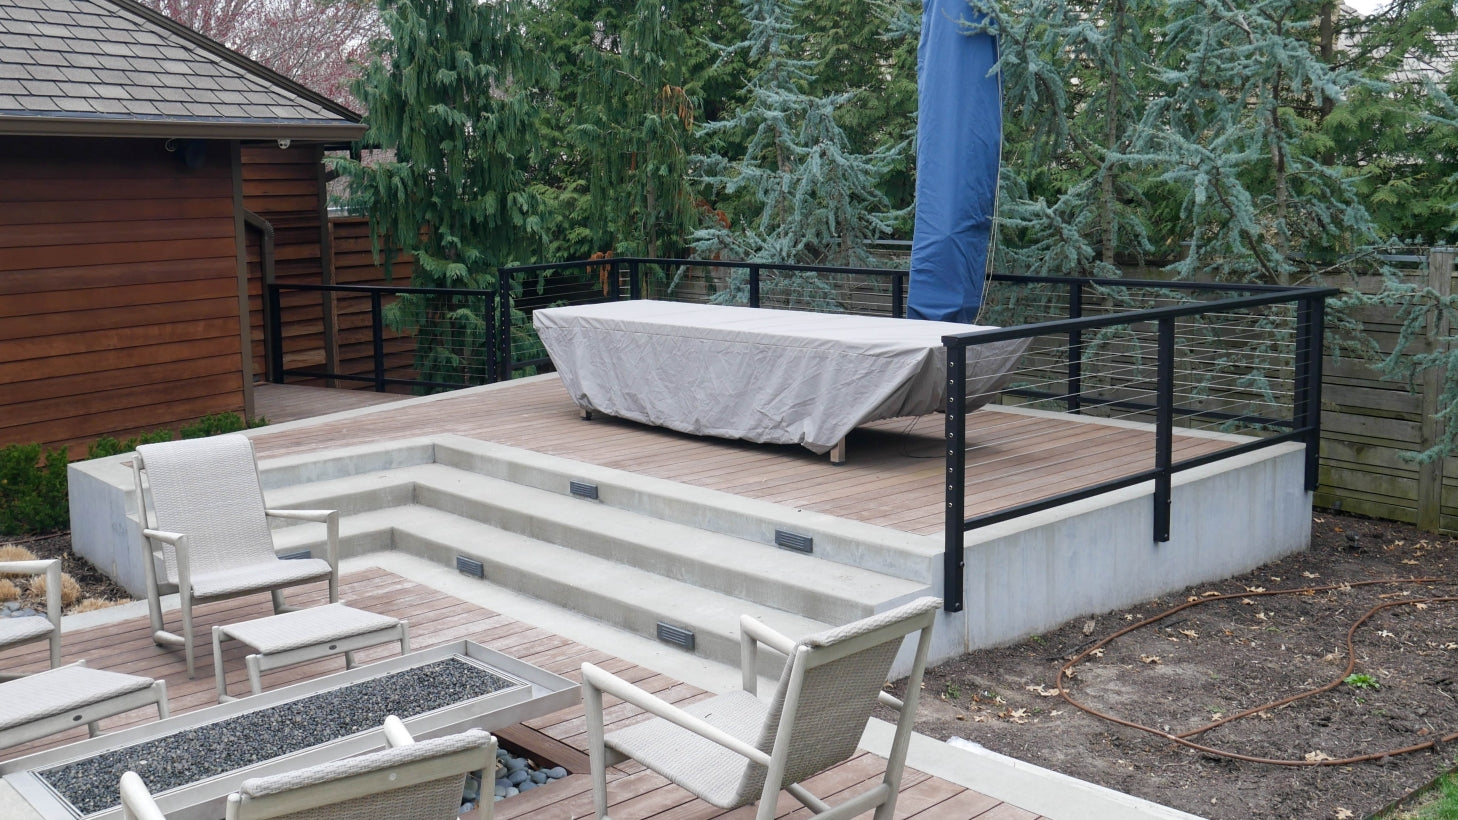 Deck Railing Cost Comparison and Railing Product Types – Deck & Rail Supply